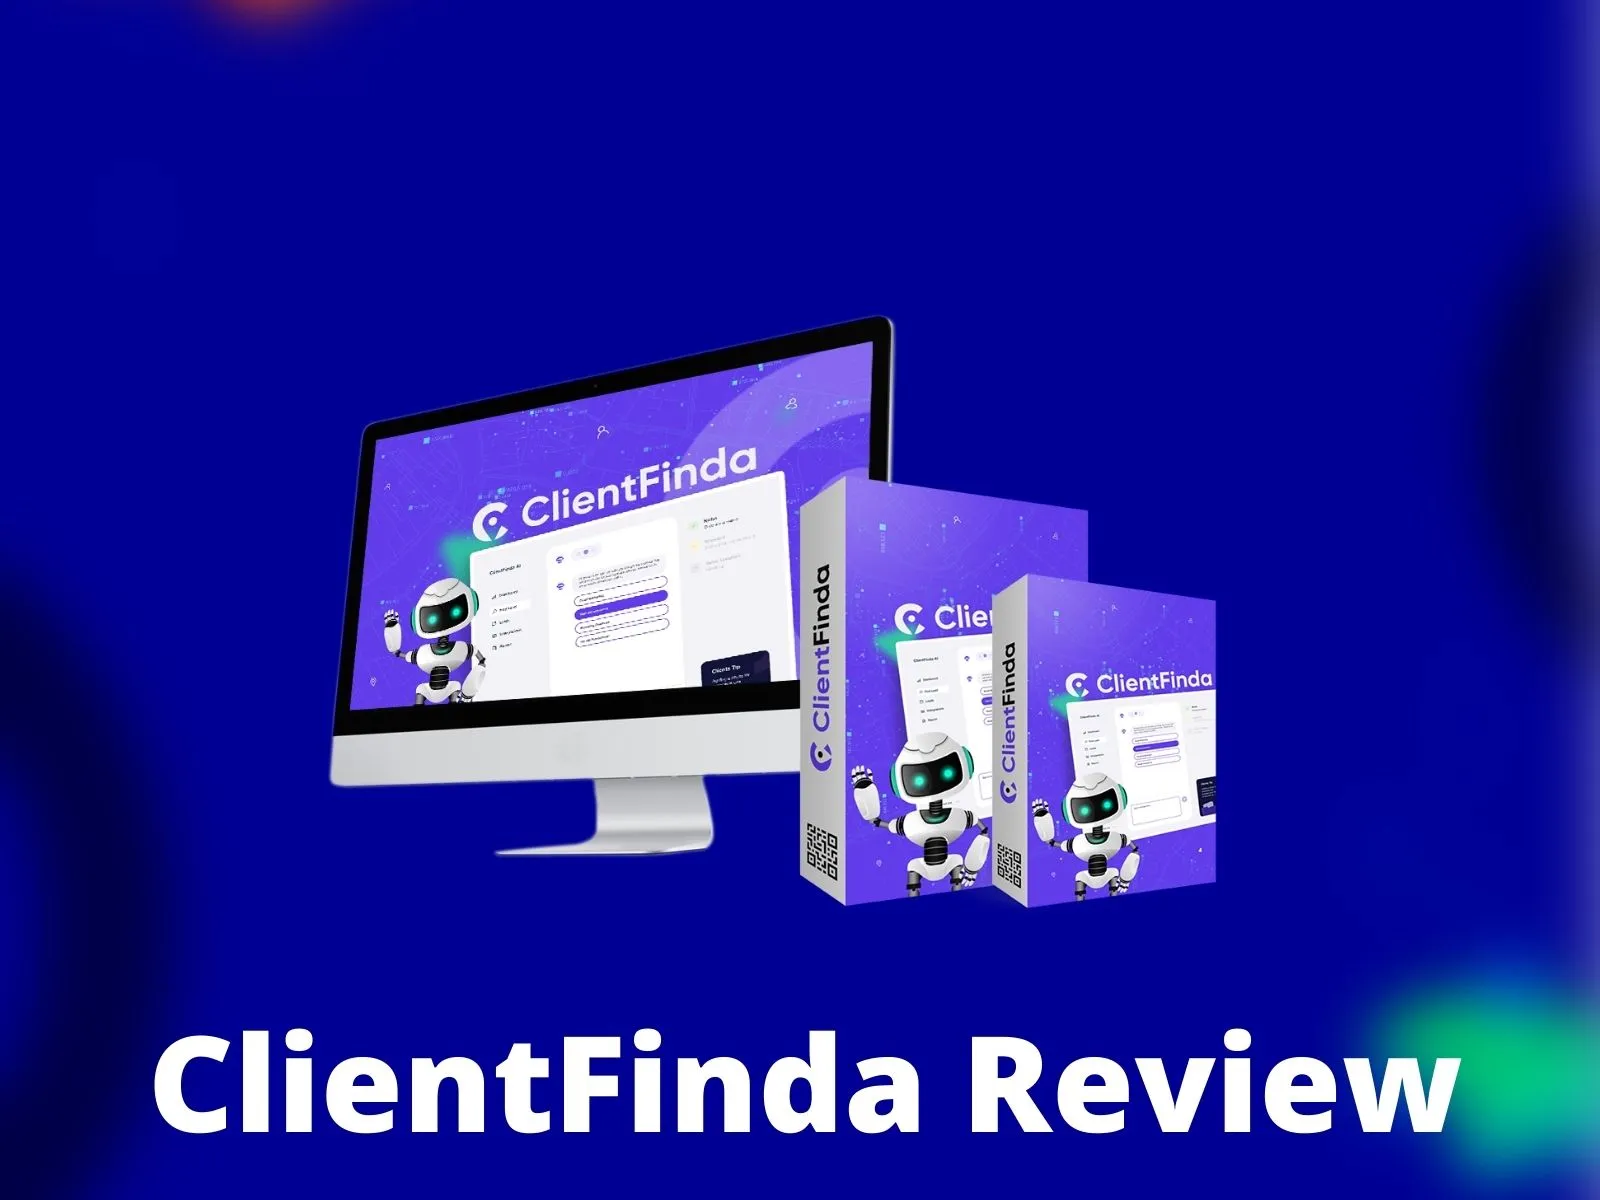 ClientFinda Review - Recommended or Not?